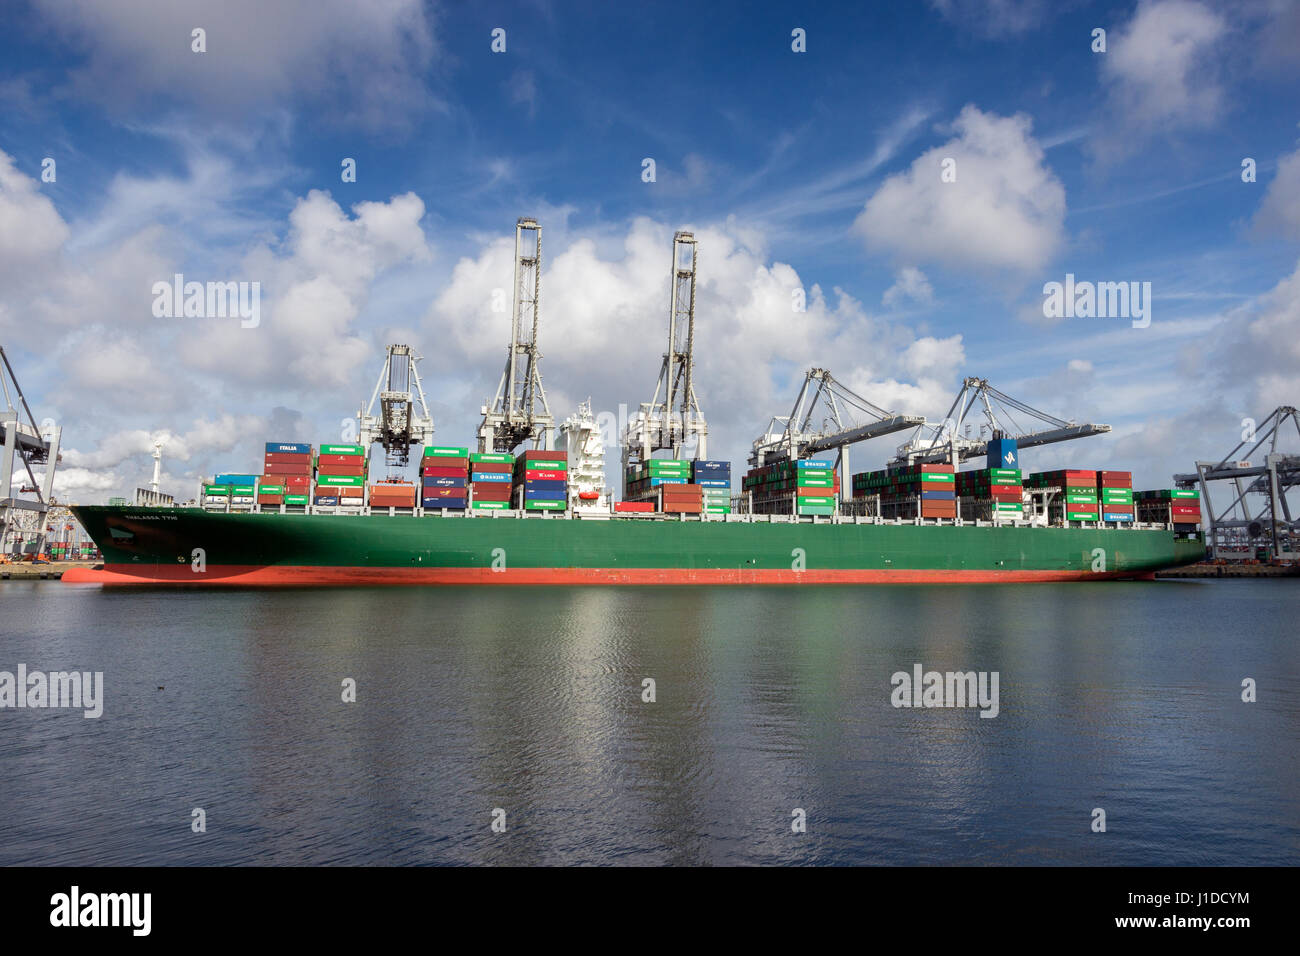 ROTTERDAM, NETHERLANDS - MAR 16, 2016: Container ship moored at the ECT container terminal in the Port of Rotterdam. Stock Photo